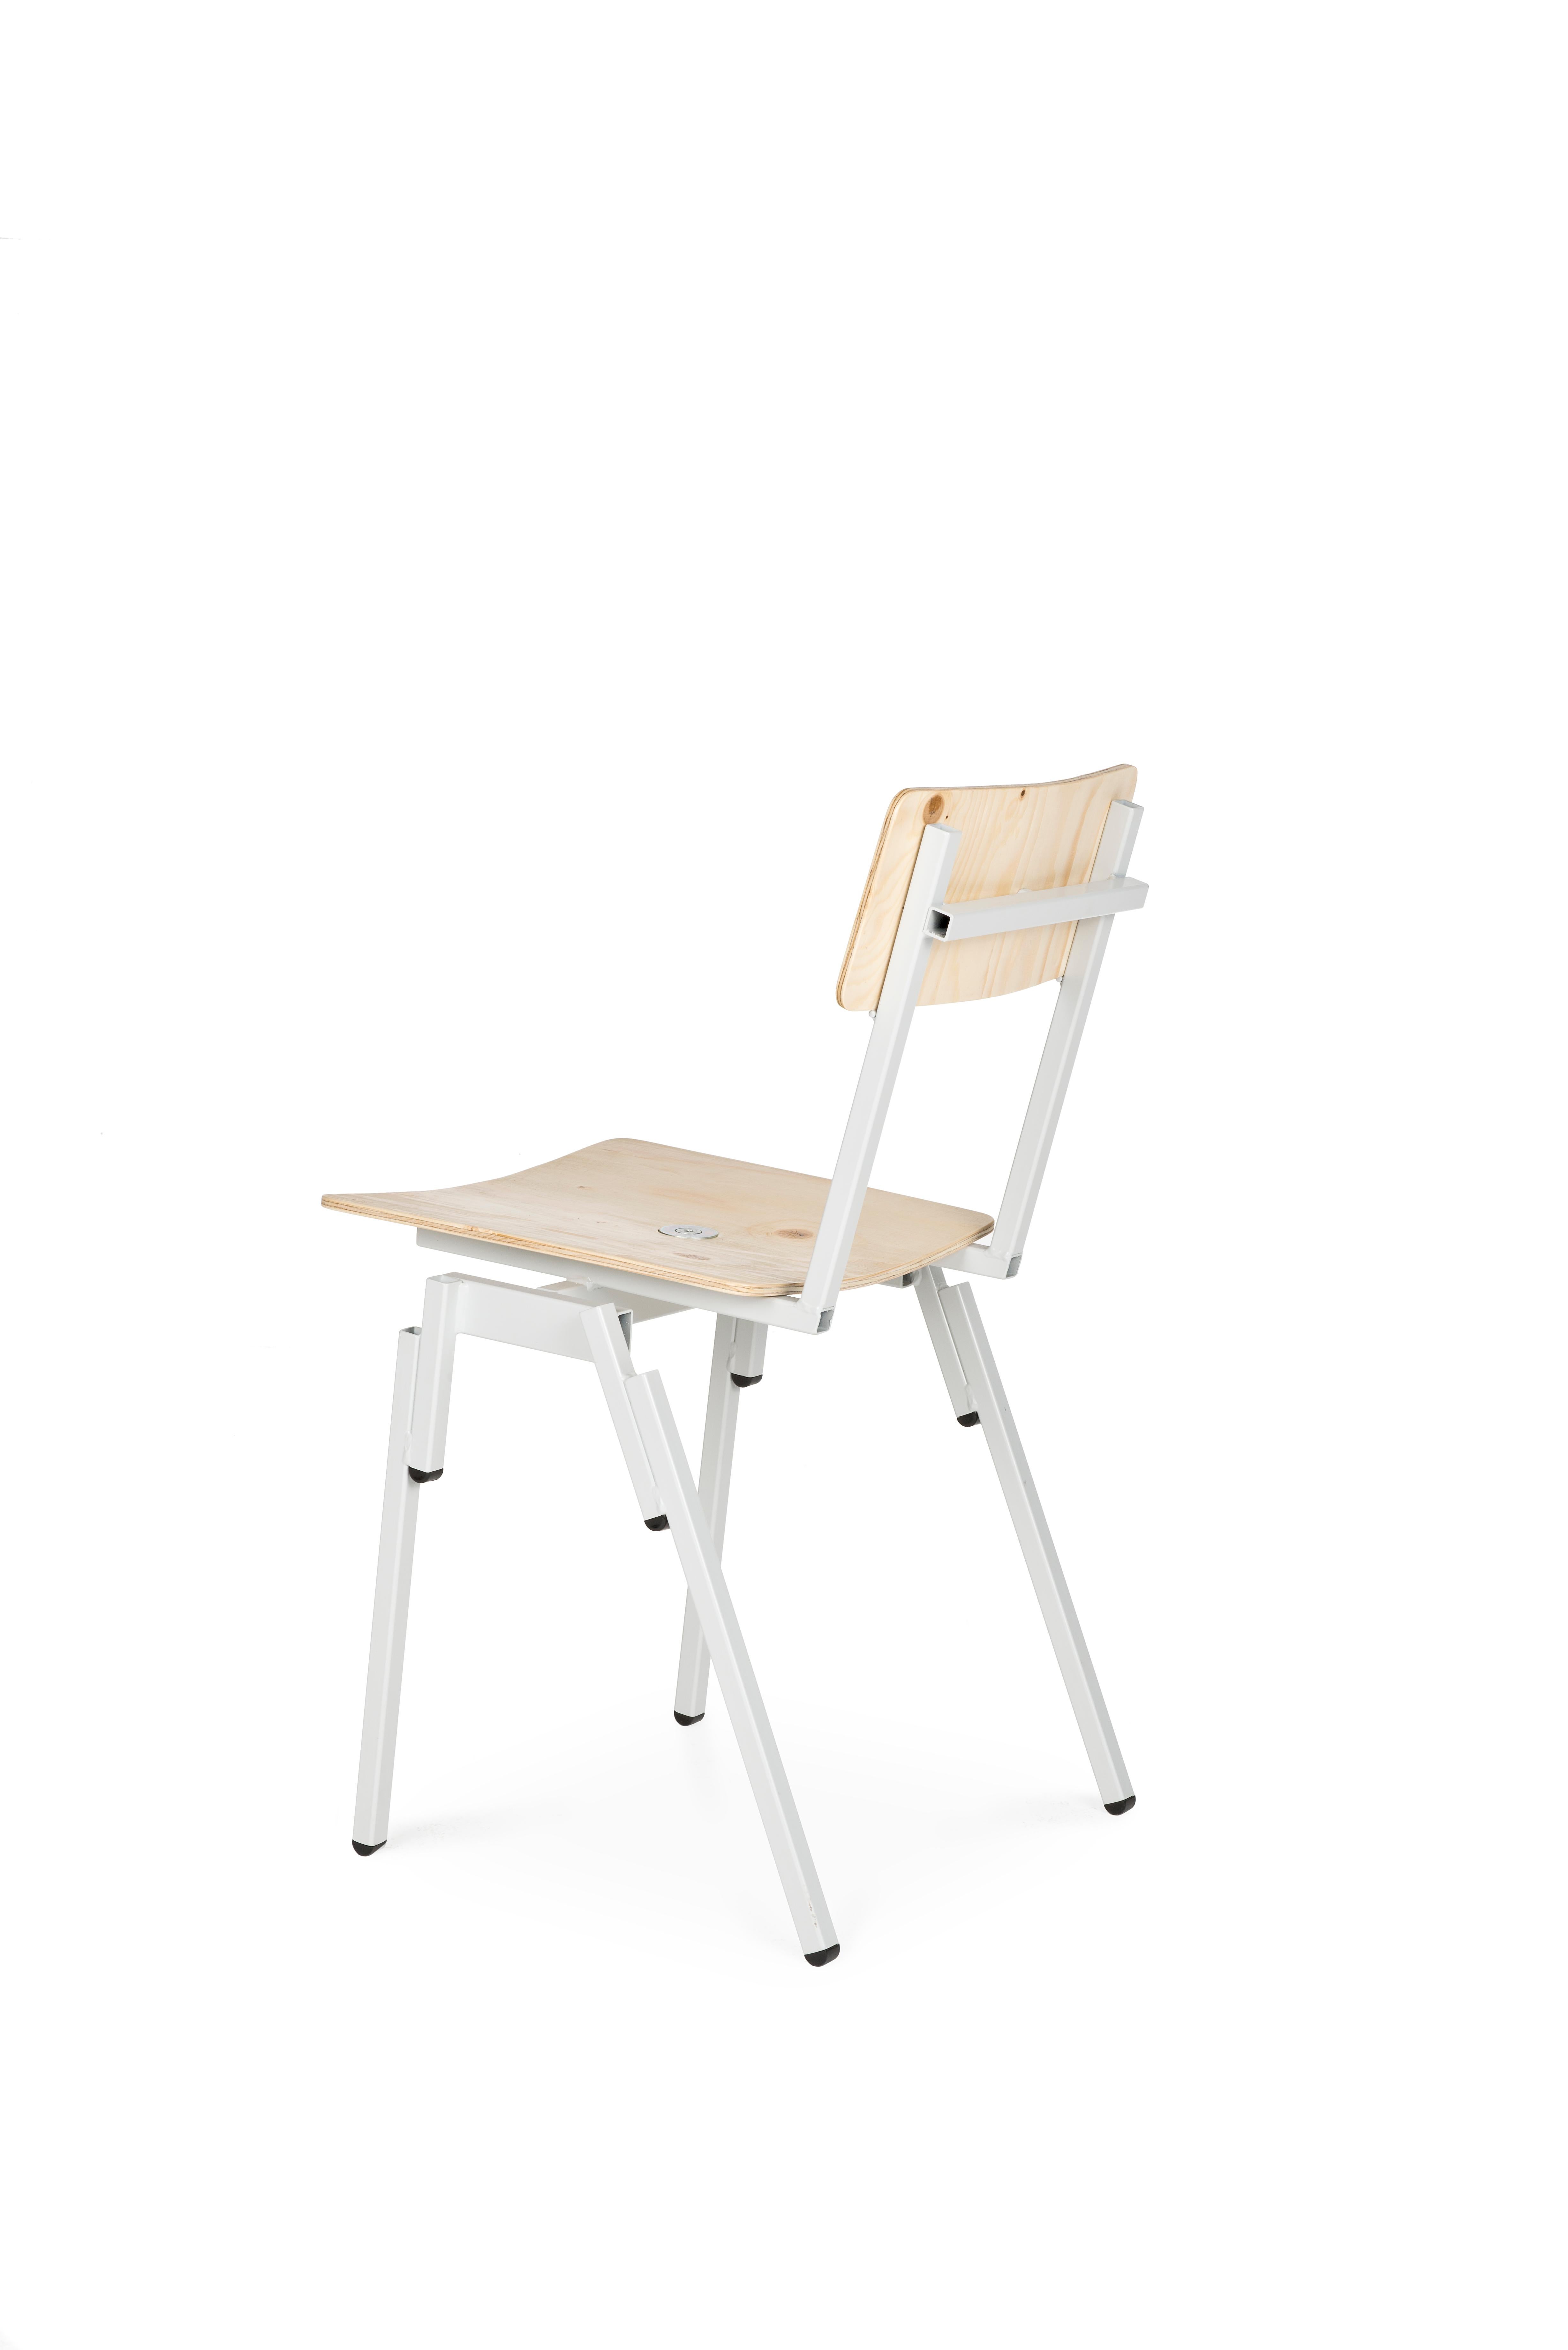 Lensvelt PHM2411 Chair In New Condition For Sale In Amsterdam, NL